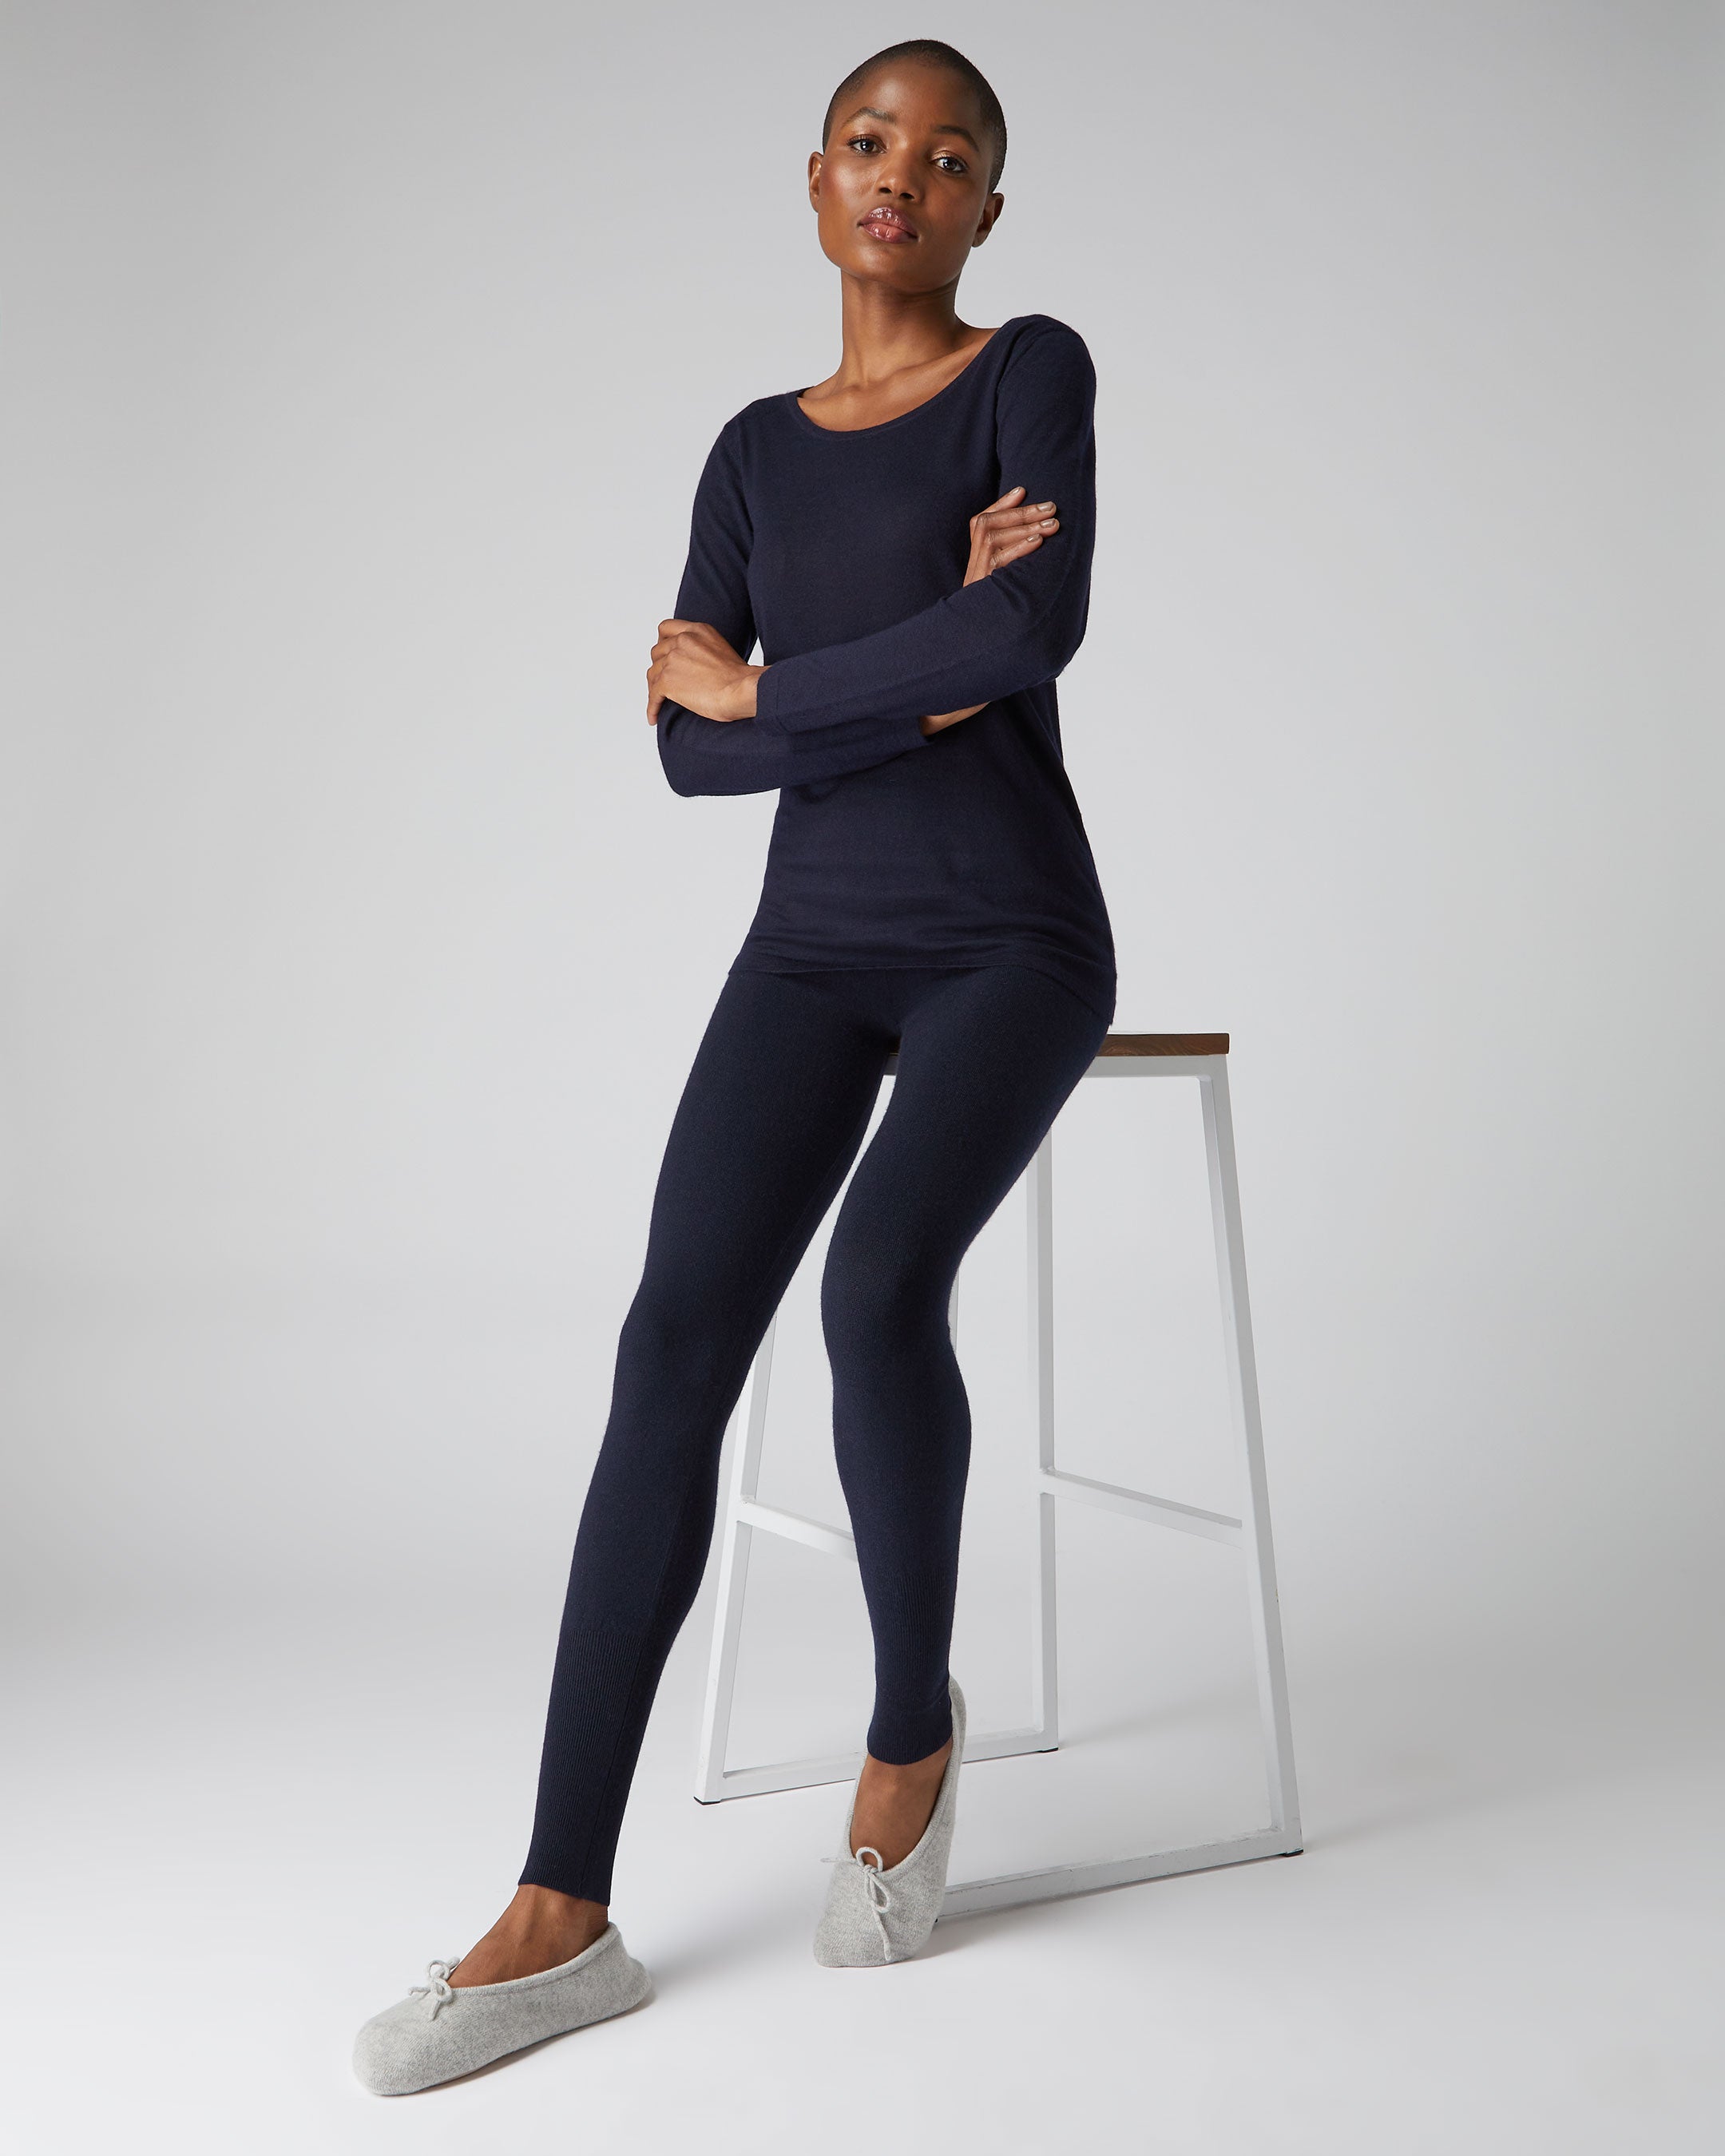 Shop The Look - Cutout Full Sleeve Top + Tights - Copper Blue - Yogue  Activewear